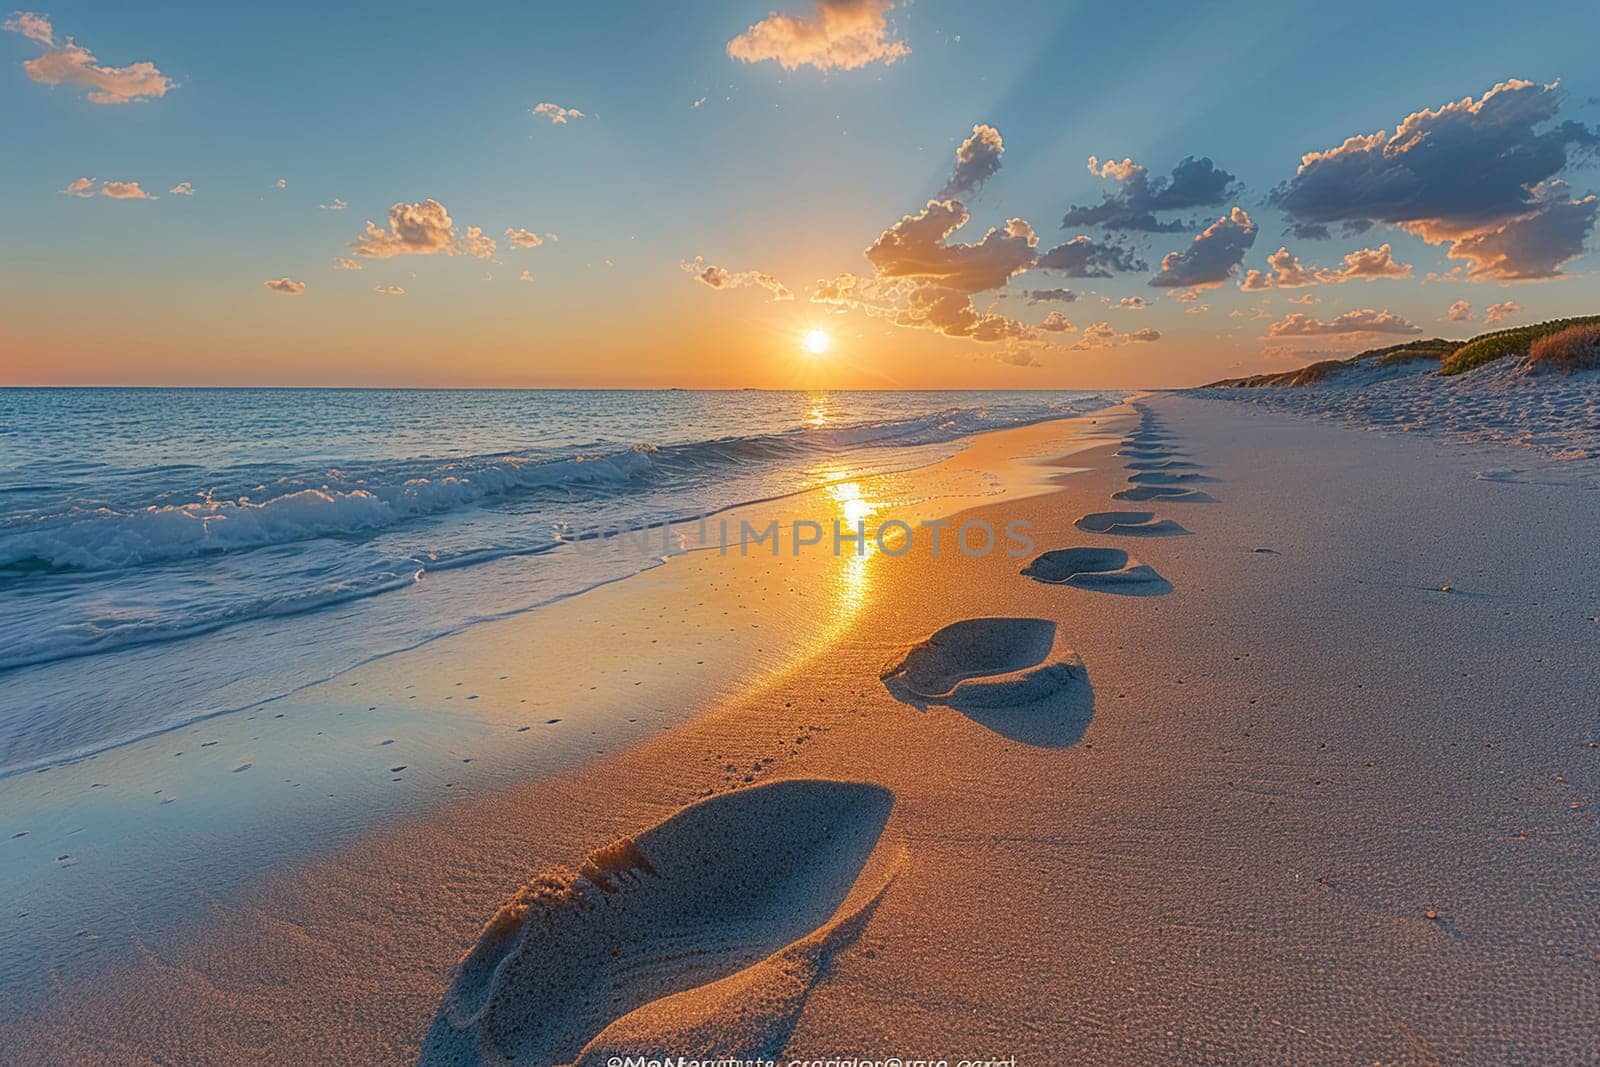 Gentle footprints in the sand leading towards the ocean, symbolizing journey and exploration.